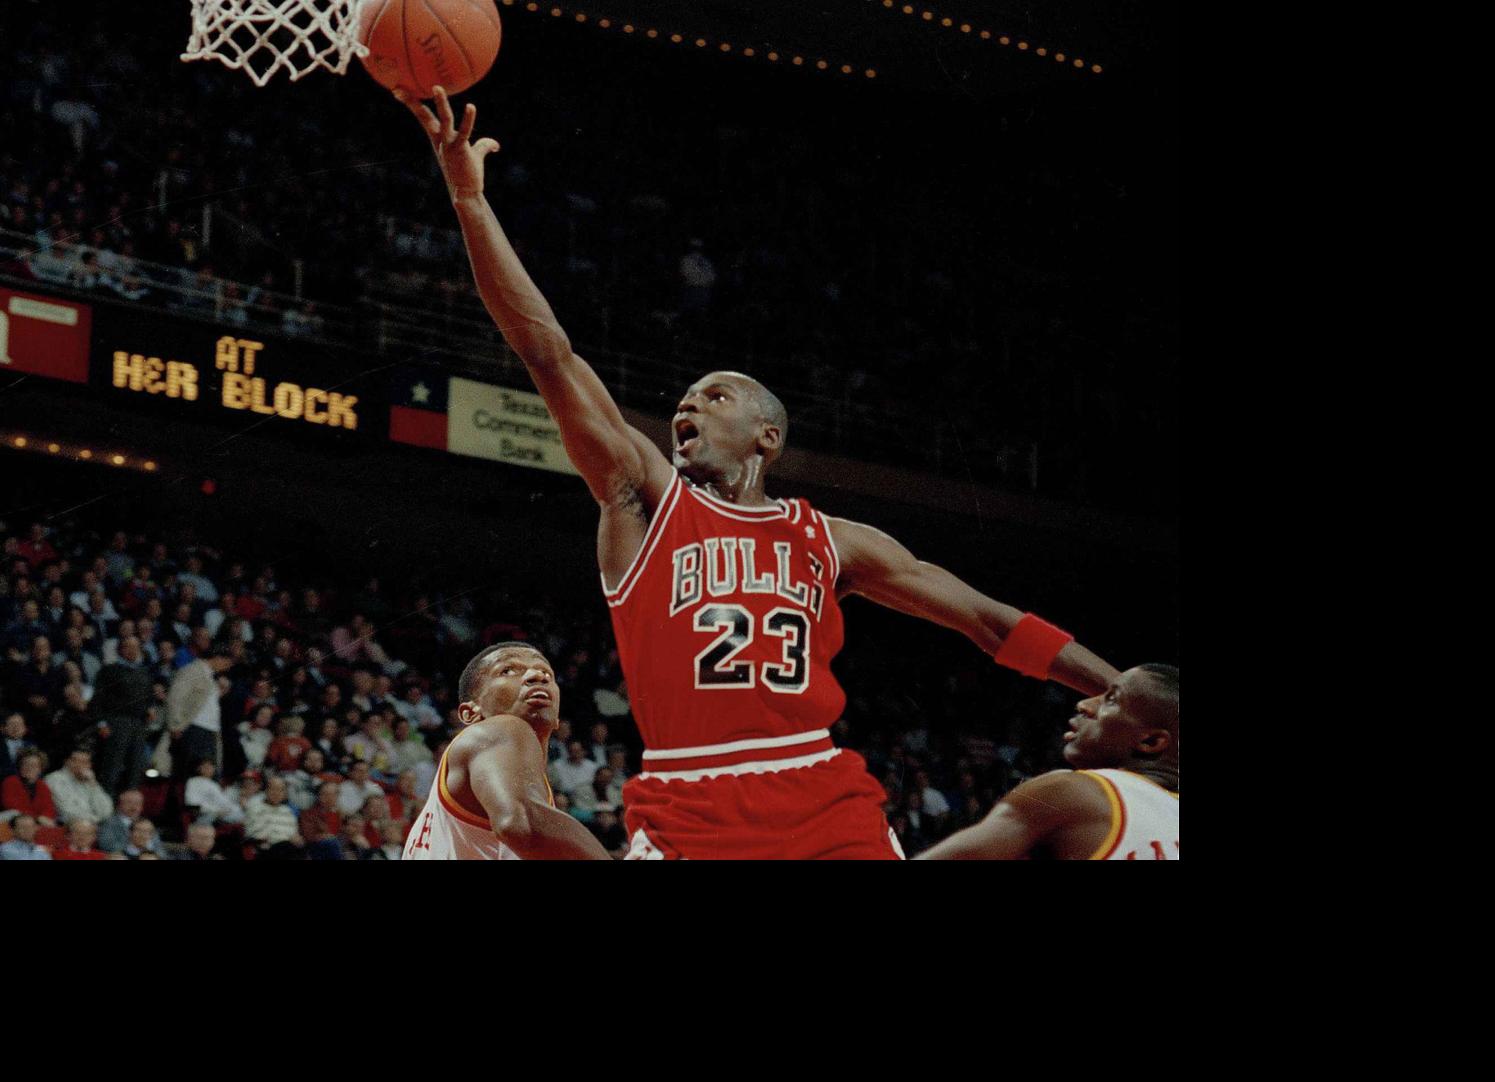 Michael Jordan Pictures: Dunking with the Bulls